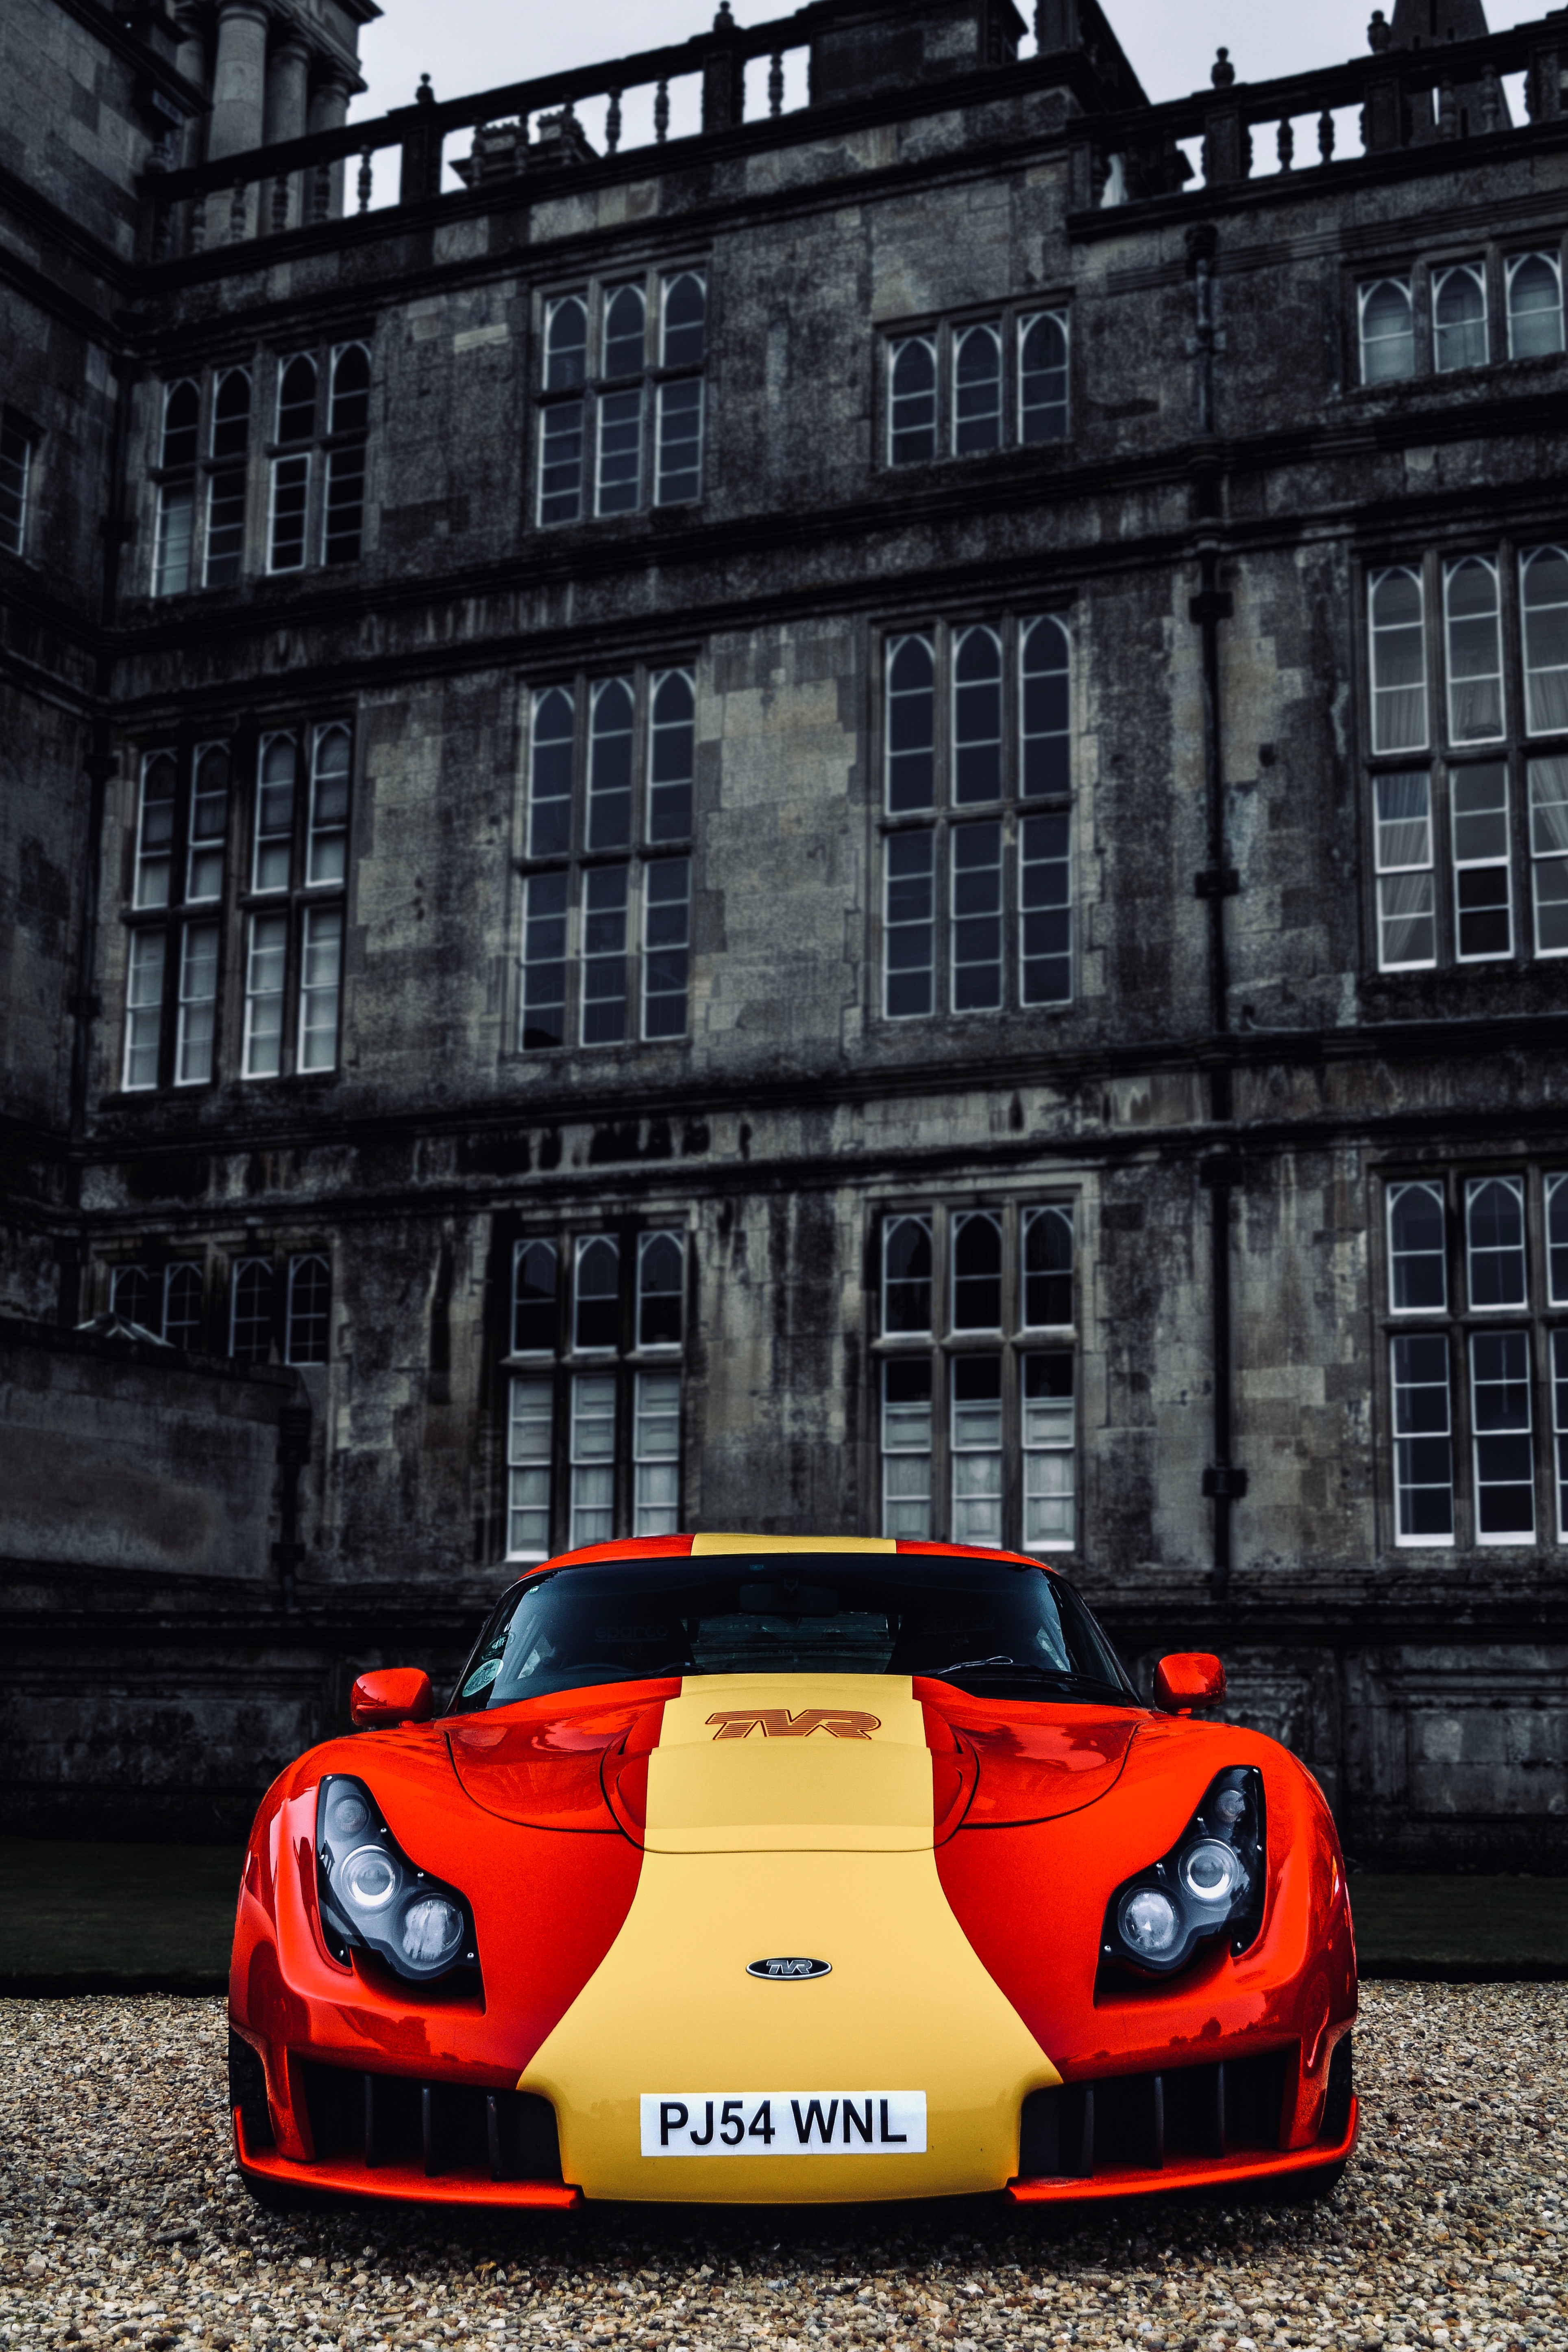 Free HD front view, cars, sports, yellow, red, car, machine, sports car, tvr sagaris